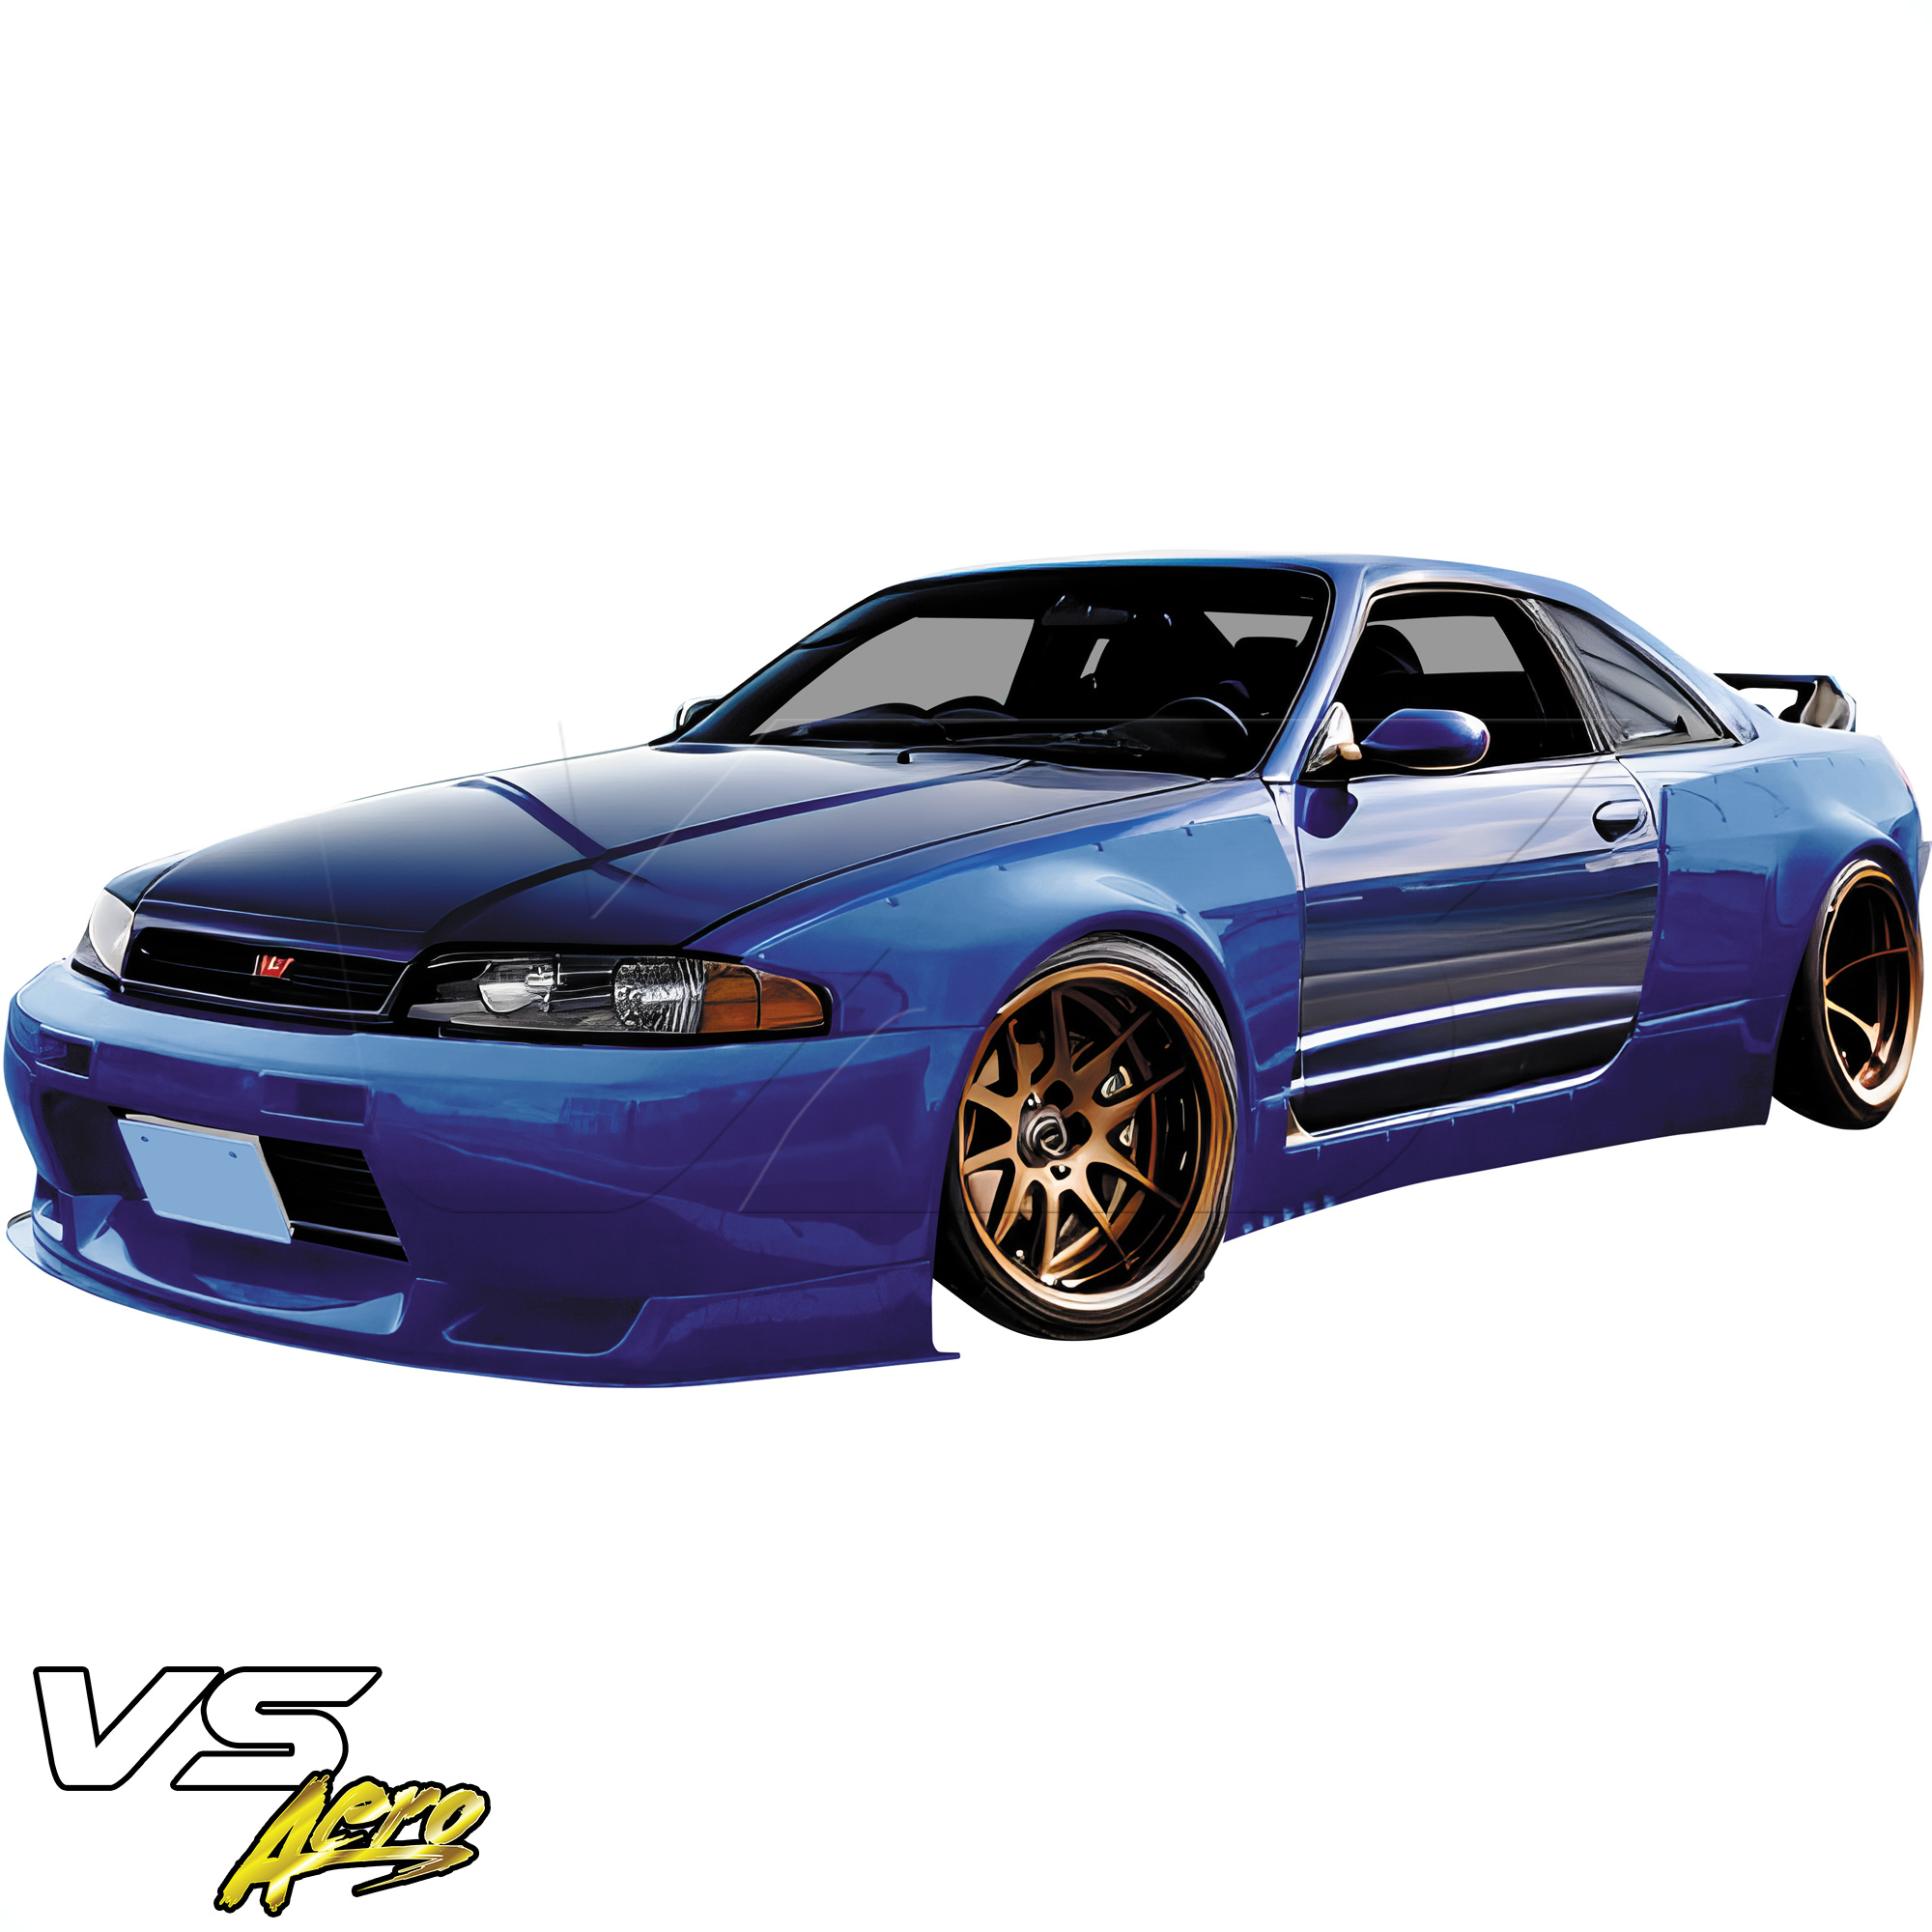 VSaero FRP TKYO Wide Body 65mm Fender Flares (front) > Nissan Skyline R33 1995-1998 > 2dr Coupe - Image 5